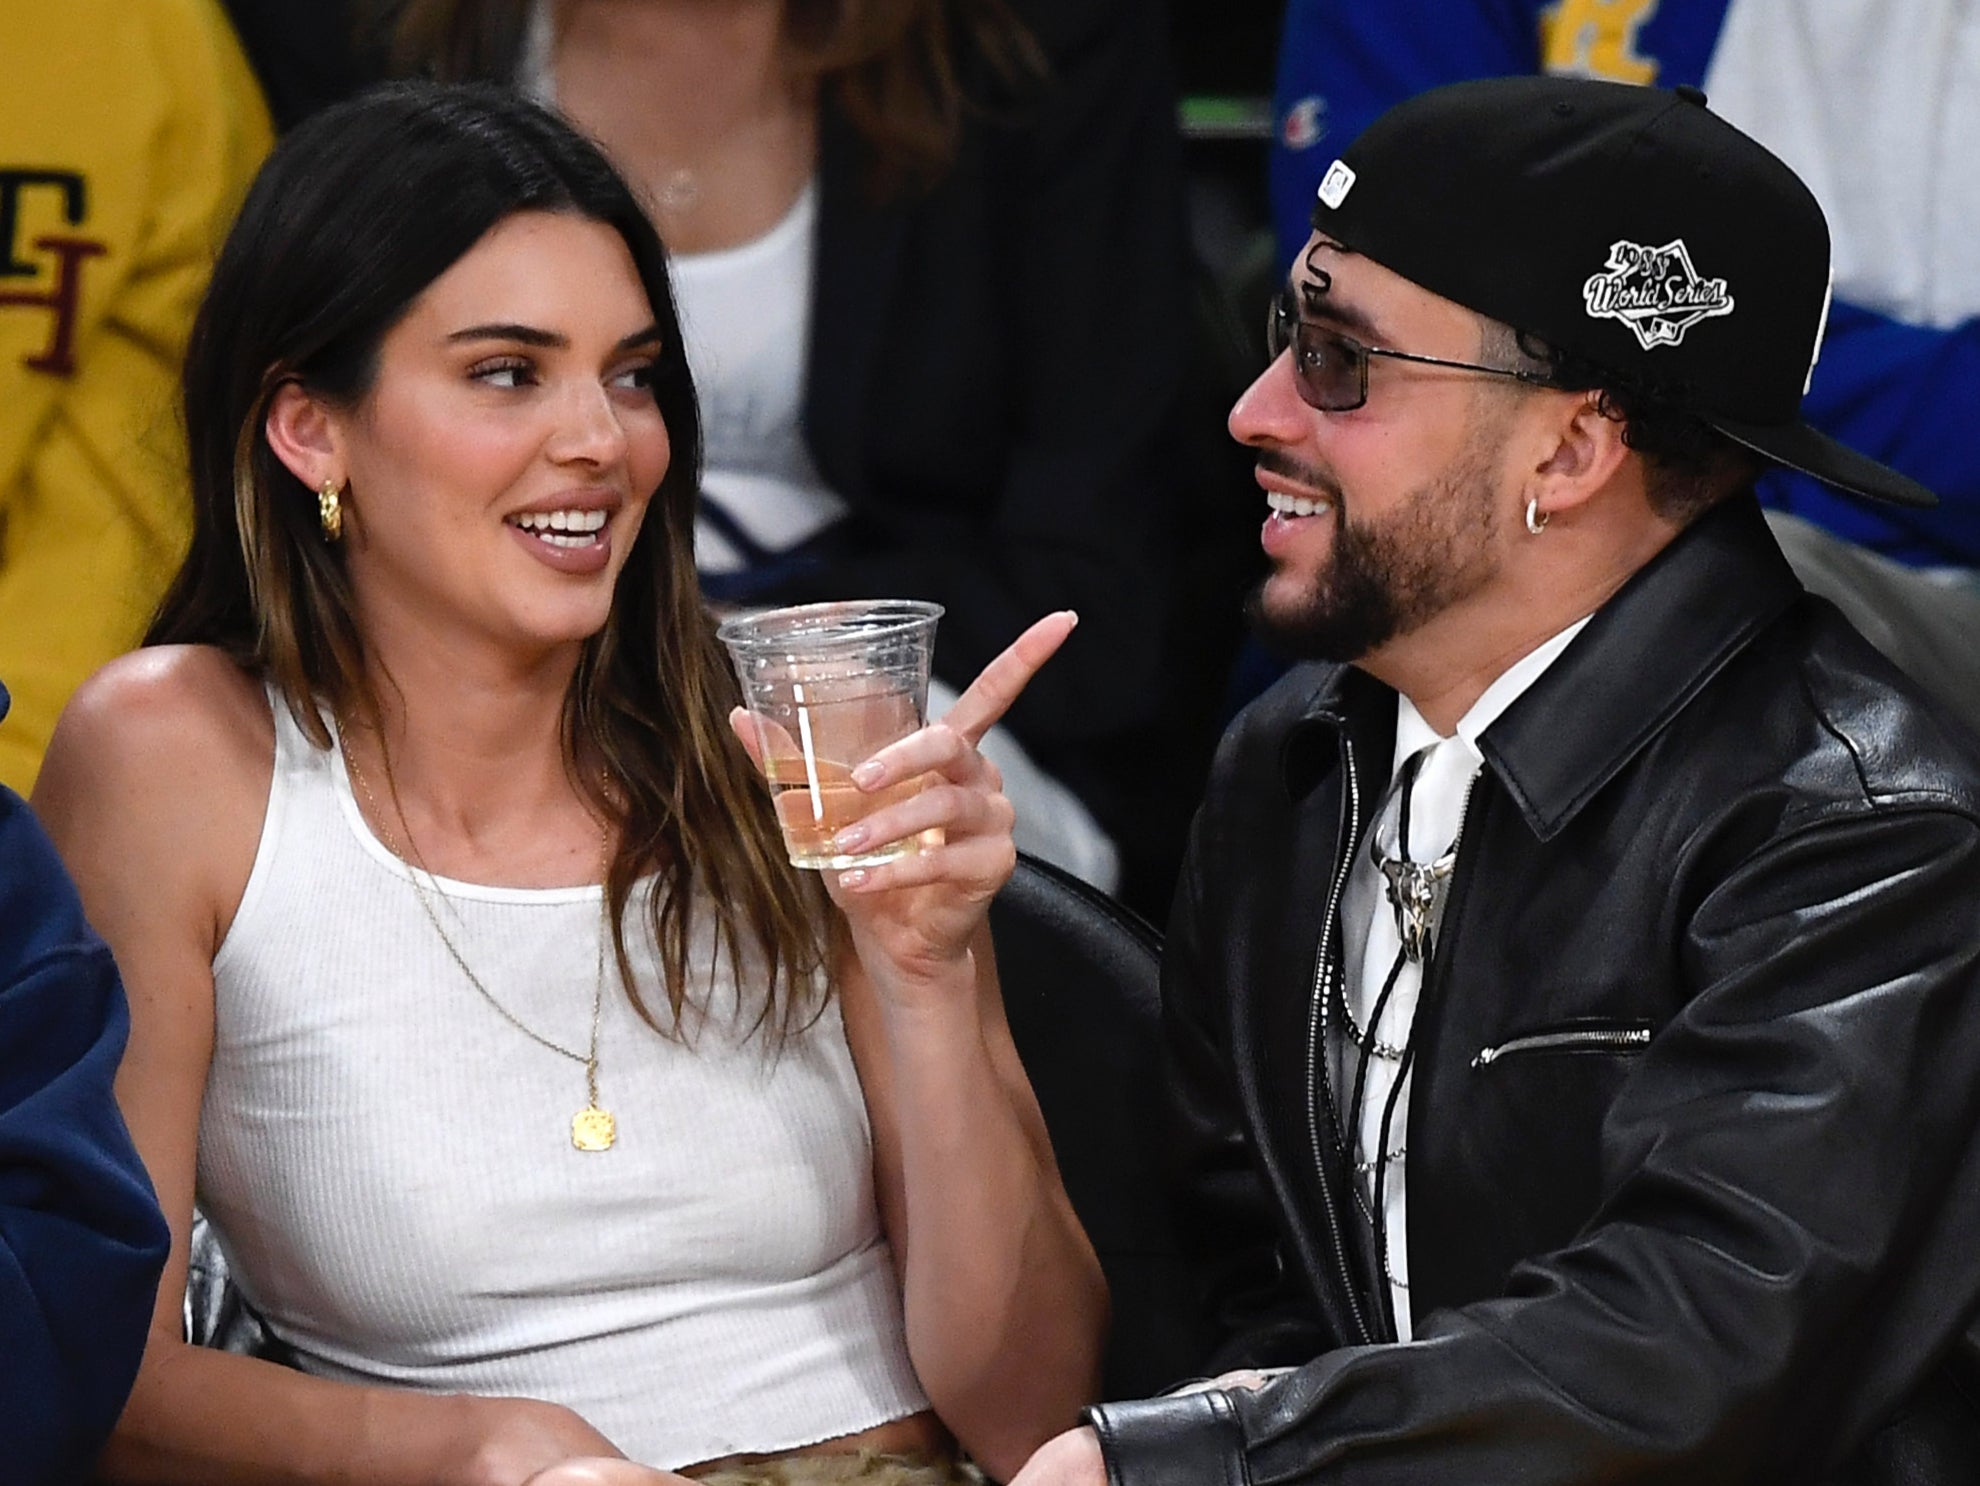 Kendall Jenner and Bad bunny at a Lakers and Golden State Warriors game in Los Angeles in May 2023